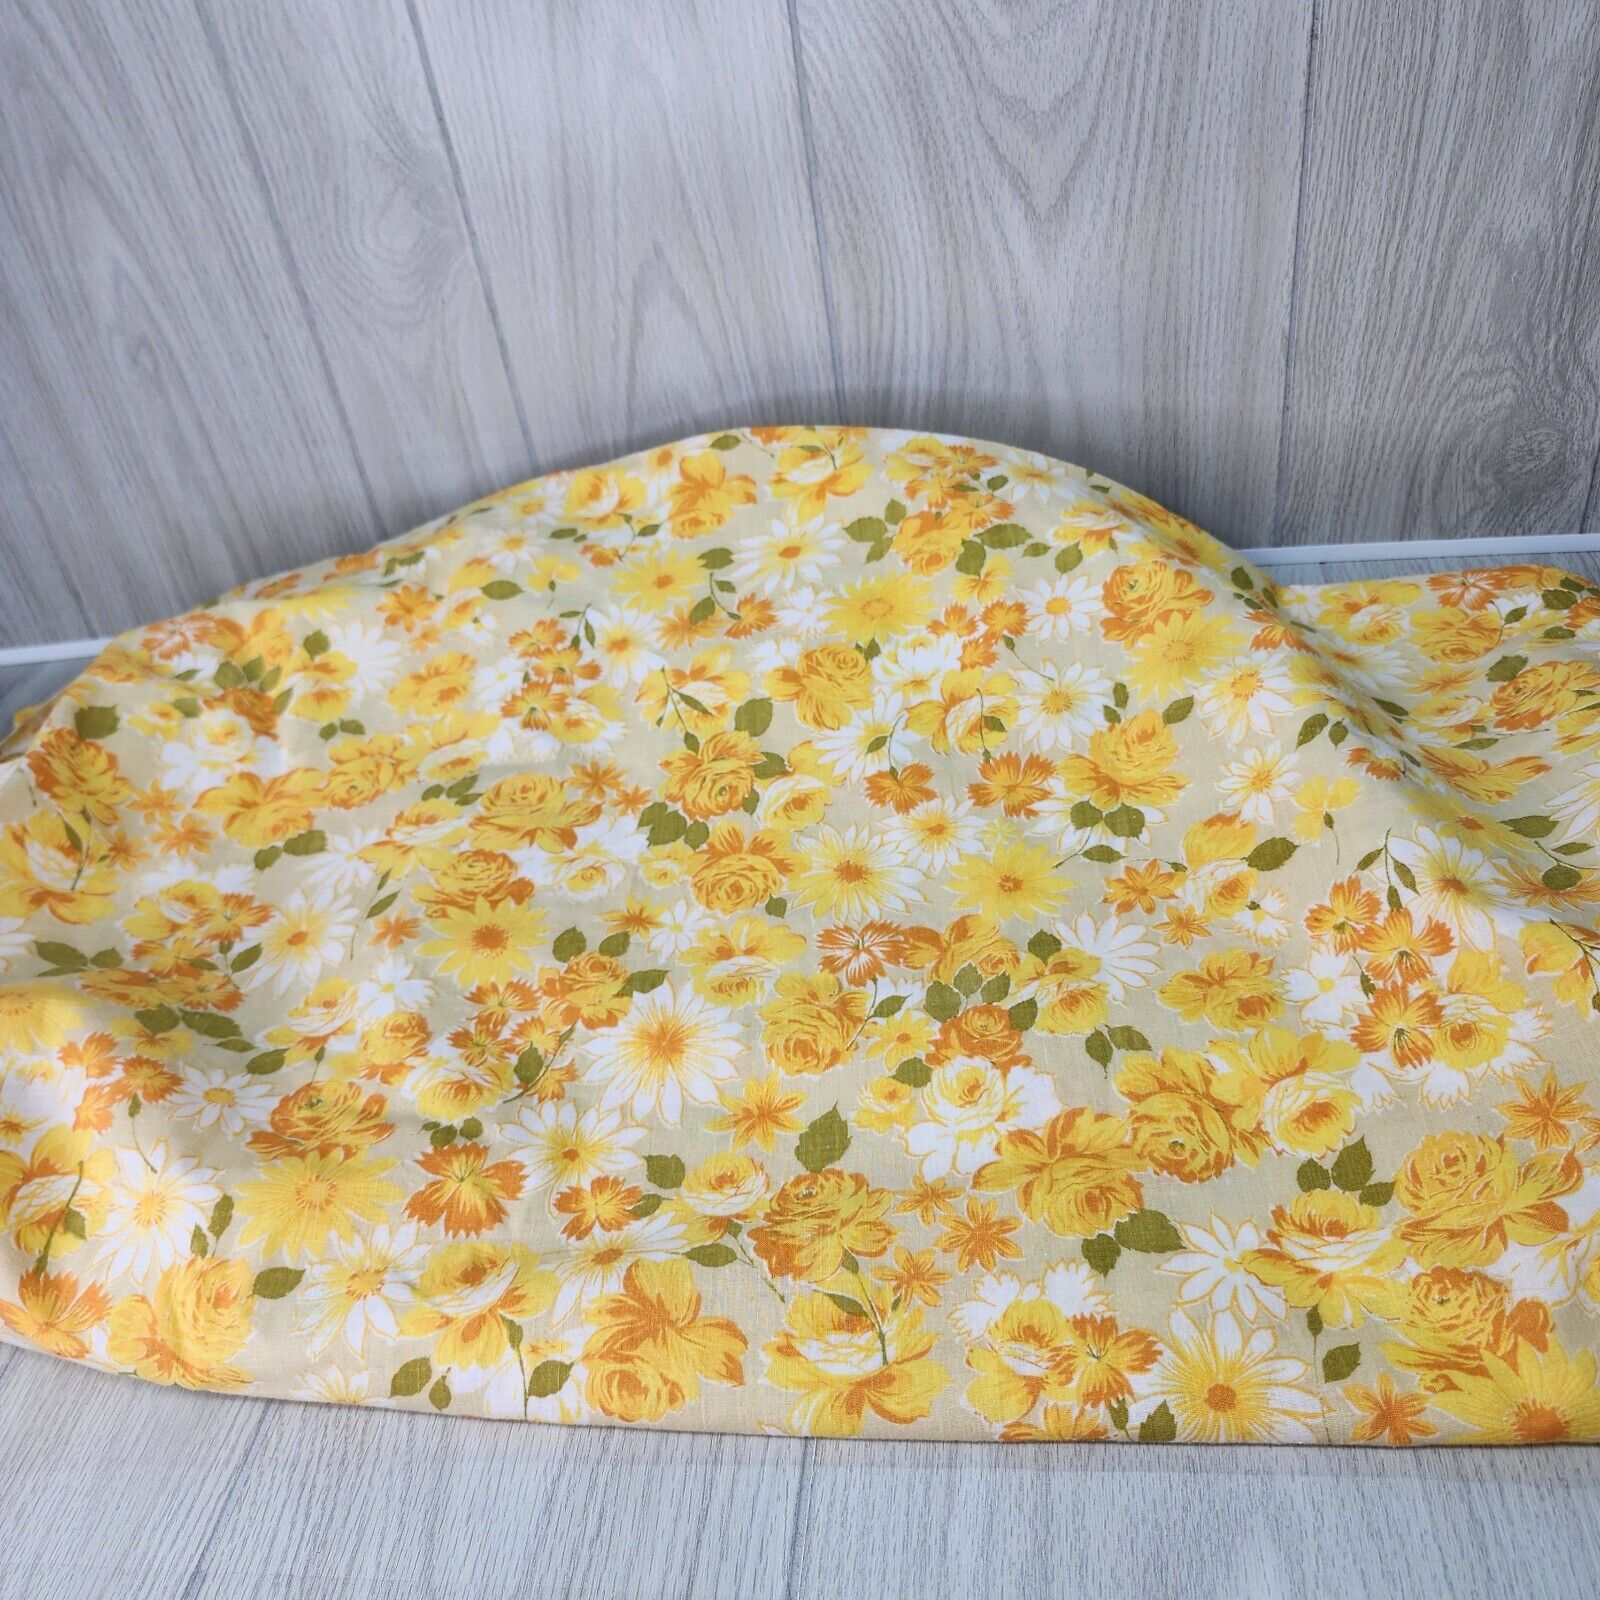 Vintage Muslin Double Bed Fitted Bottom Sheet Floral Yellow Roses Daisies 54x76